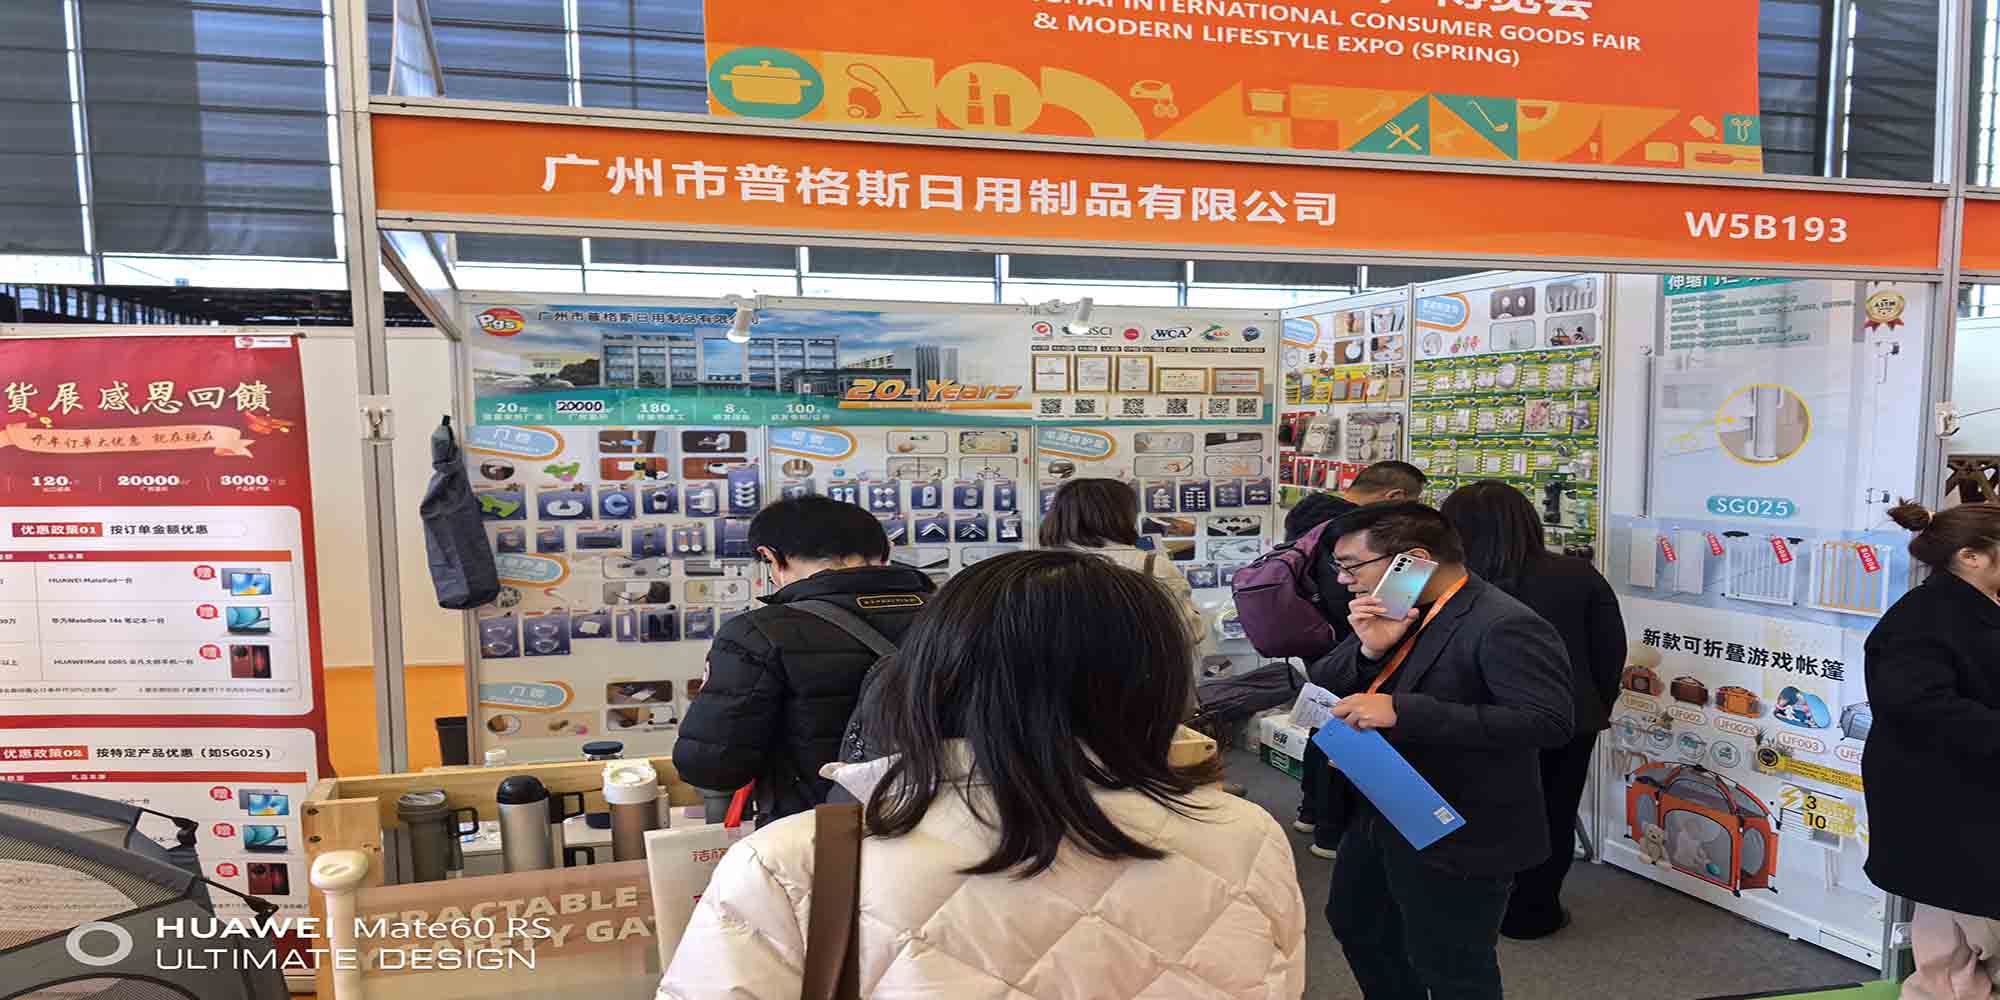 The Exhibition situation of 2024 Shanghai International Consumer Goods Fair & Modern Lifestyle Expo(Spring)